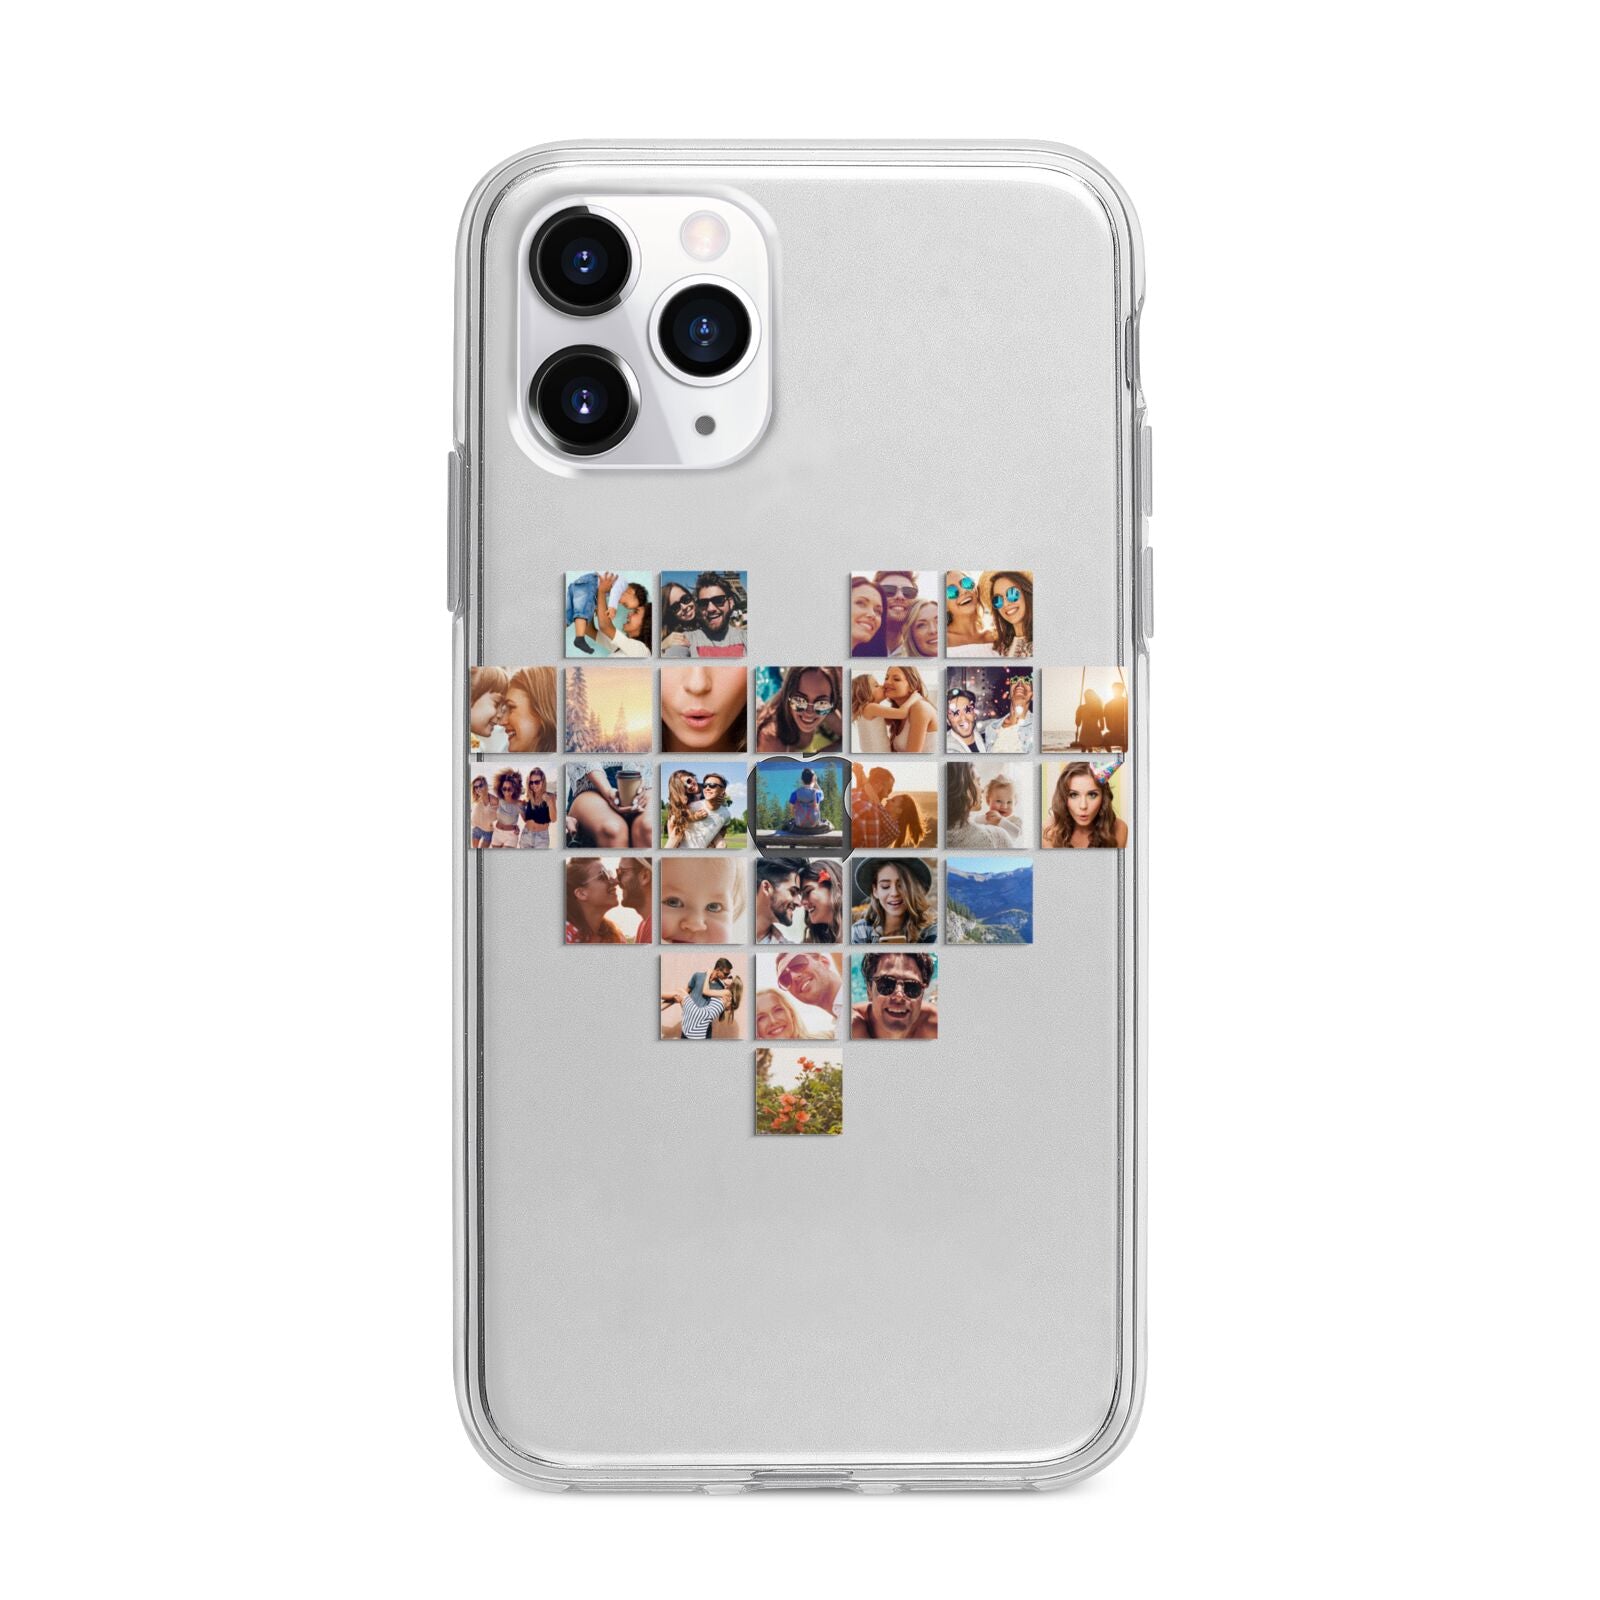 Large Heart Photo Montage Upload Apple iPhone 11 Pro Max in Silver with Bumper Case